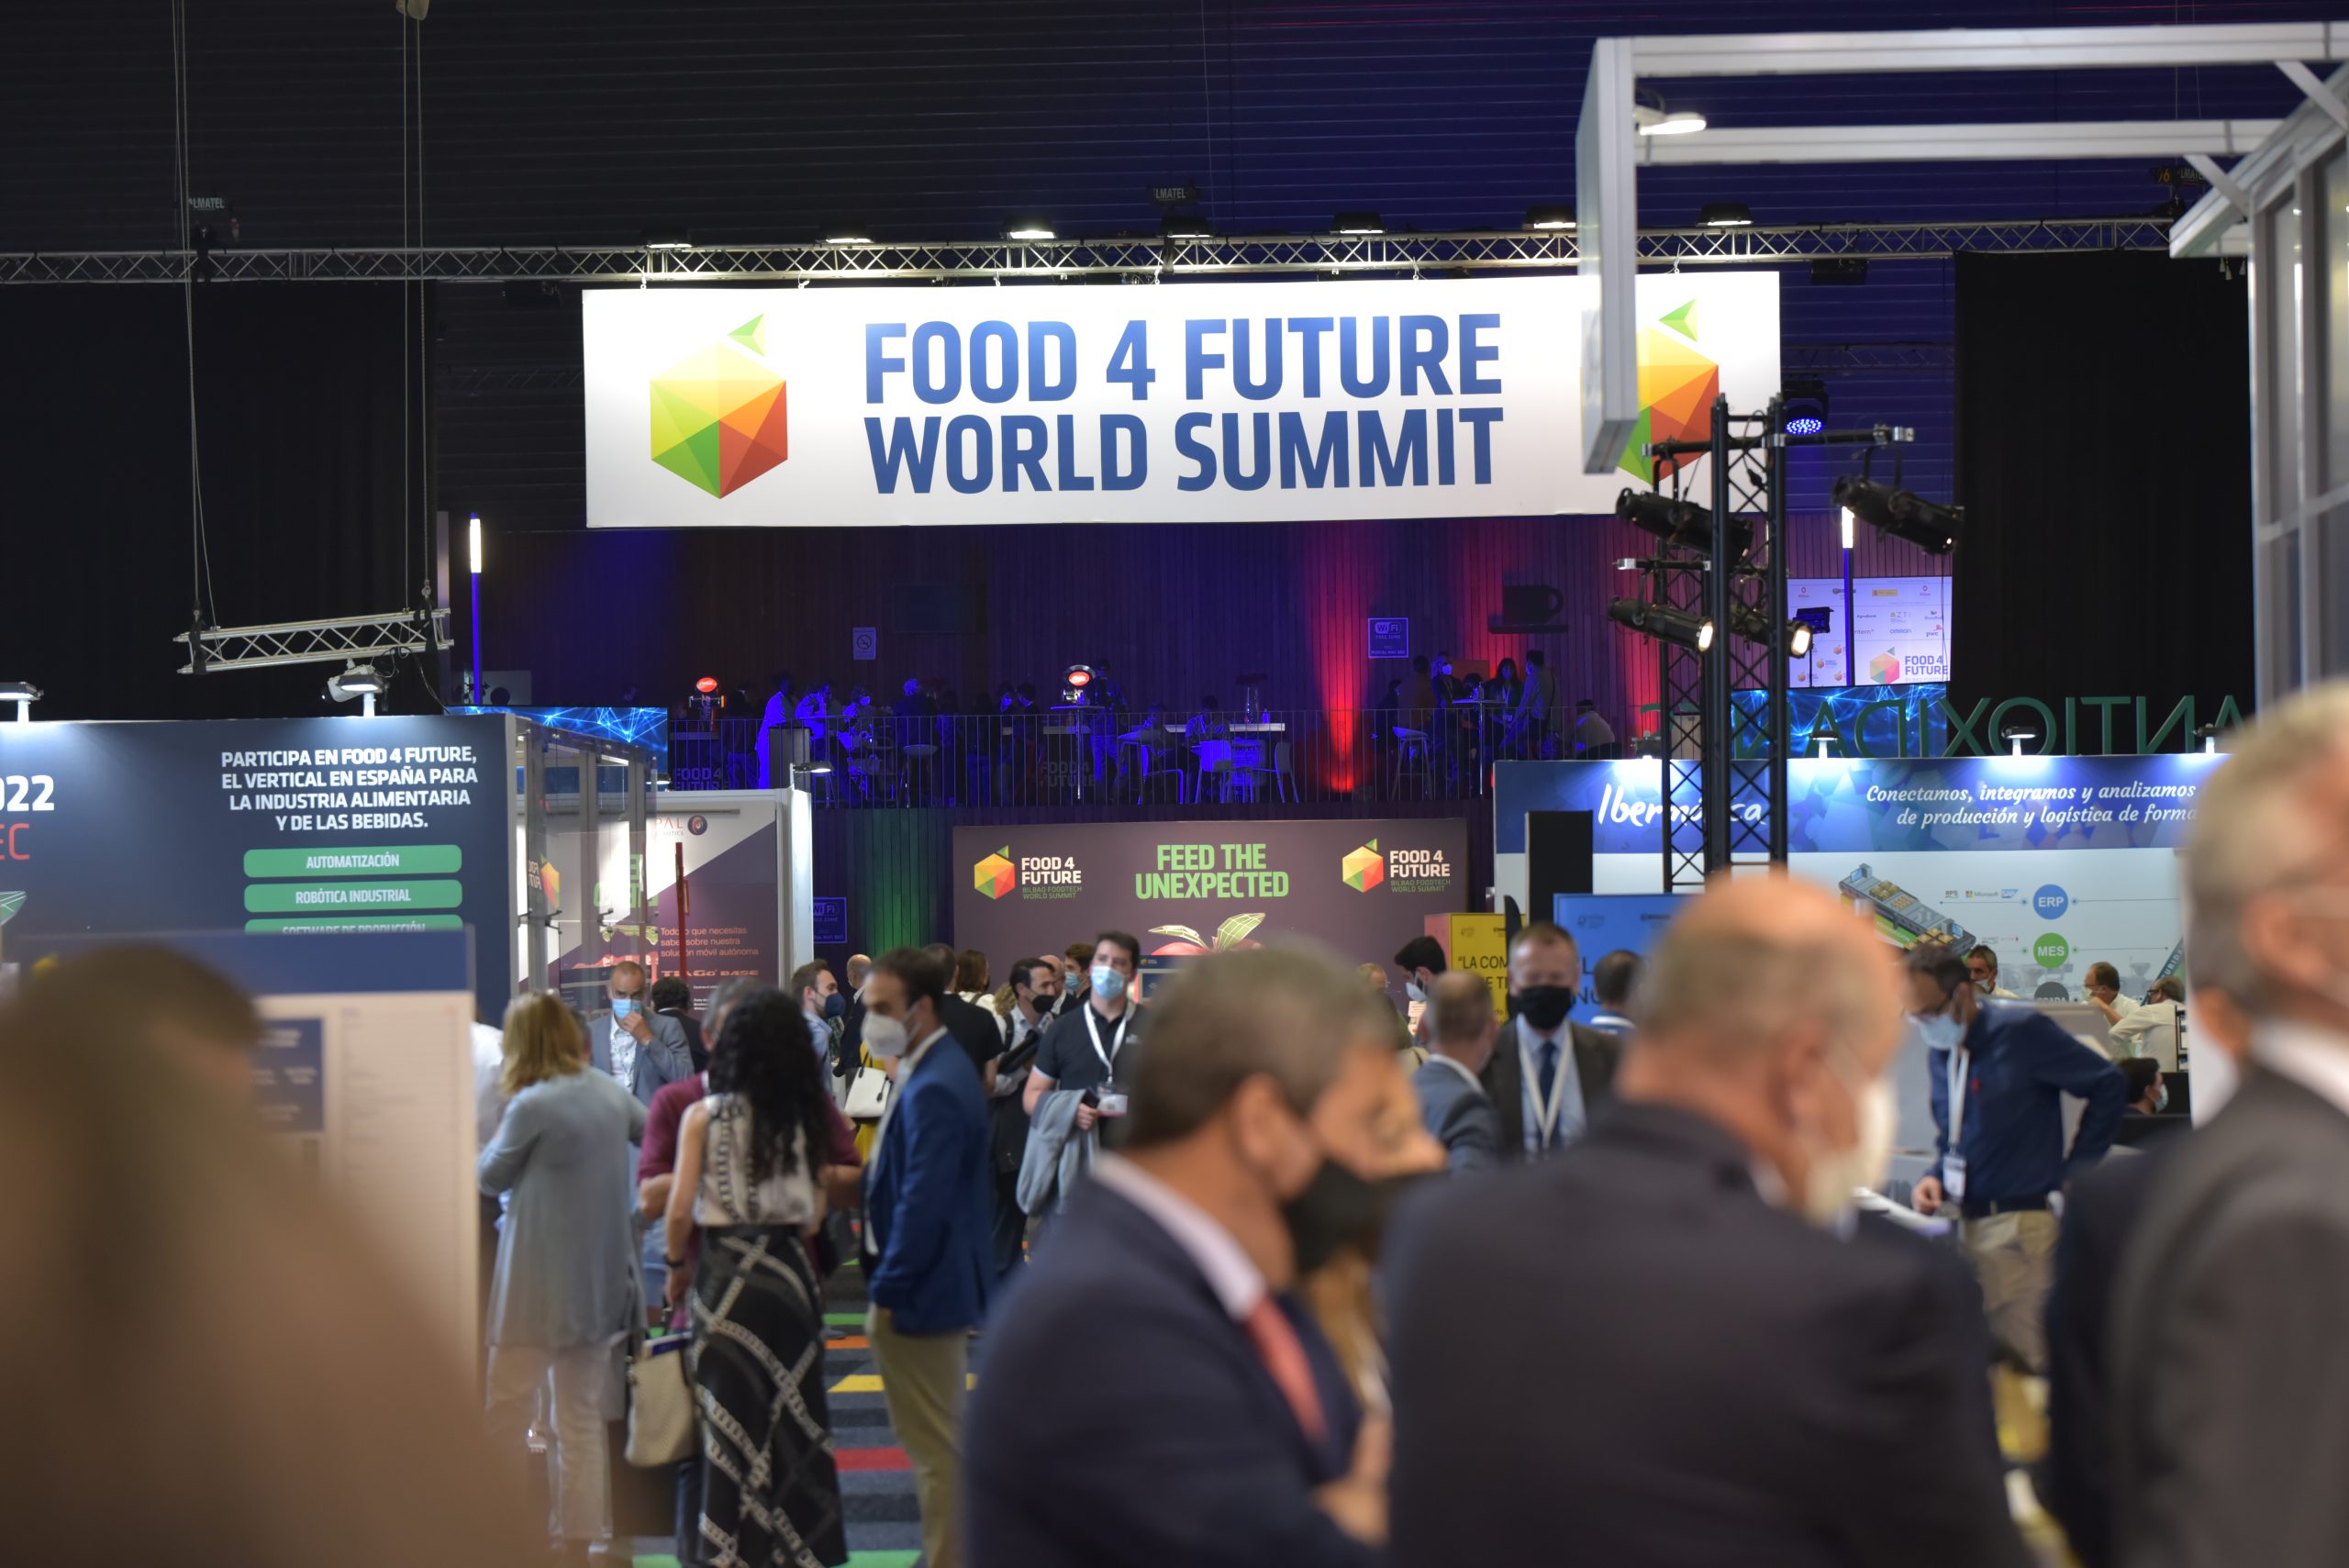 The Netherlands, world leader in foodtech, protagonist of Food 4 Future 2022